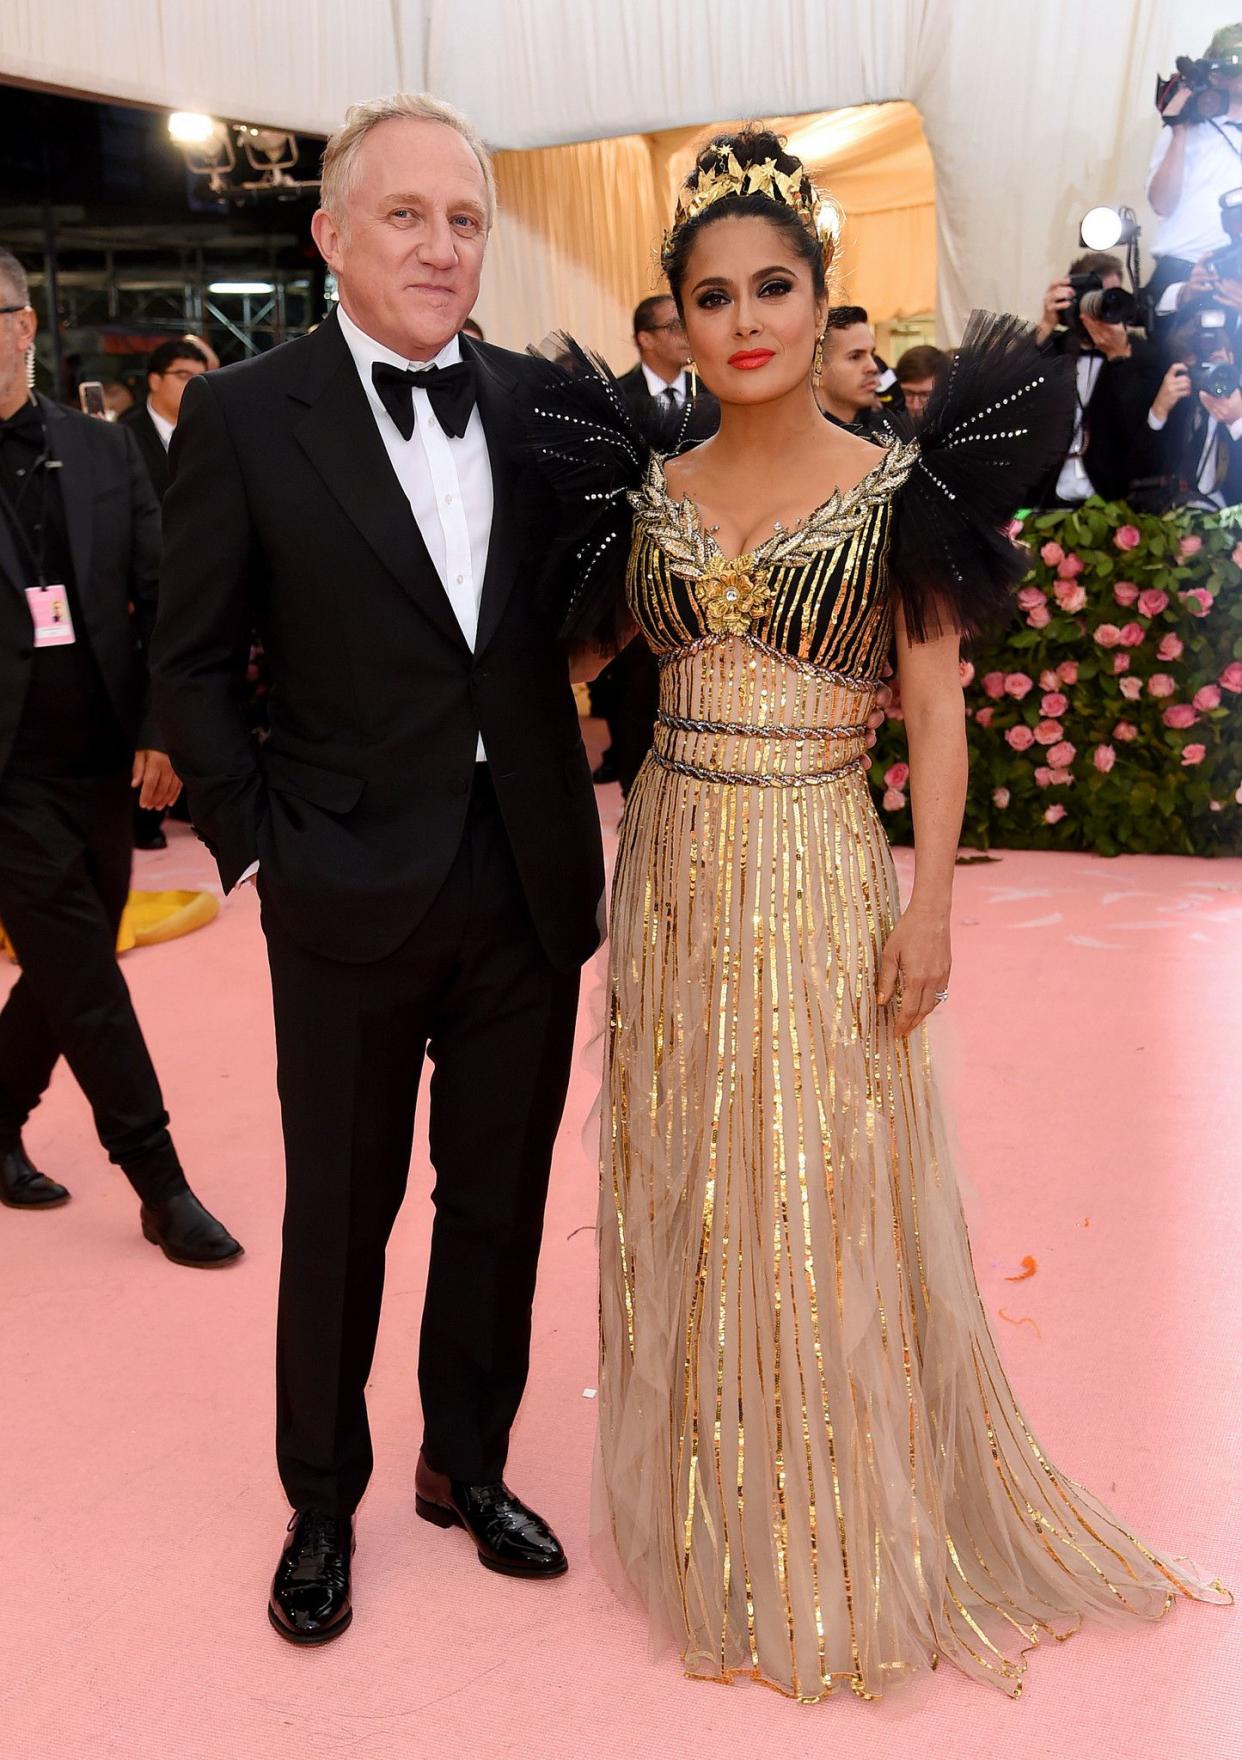 Francois-Henri Pinault and Salma Hayek attend The 2019 Met Gala Celebrating Camp: Notes on Fashion at Metropolitan Museum of Art on May 06, 2019 in New York City.